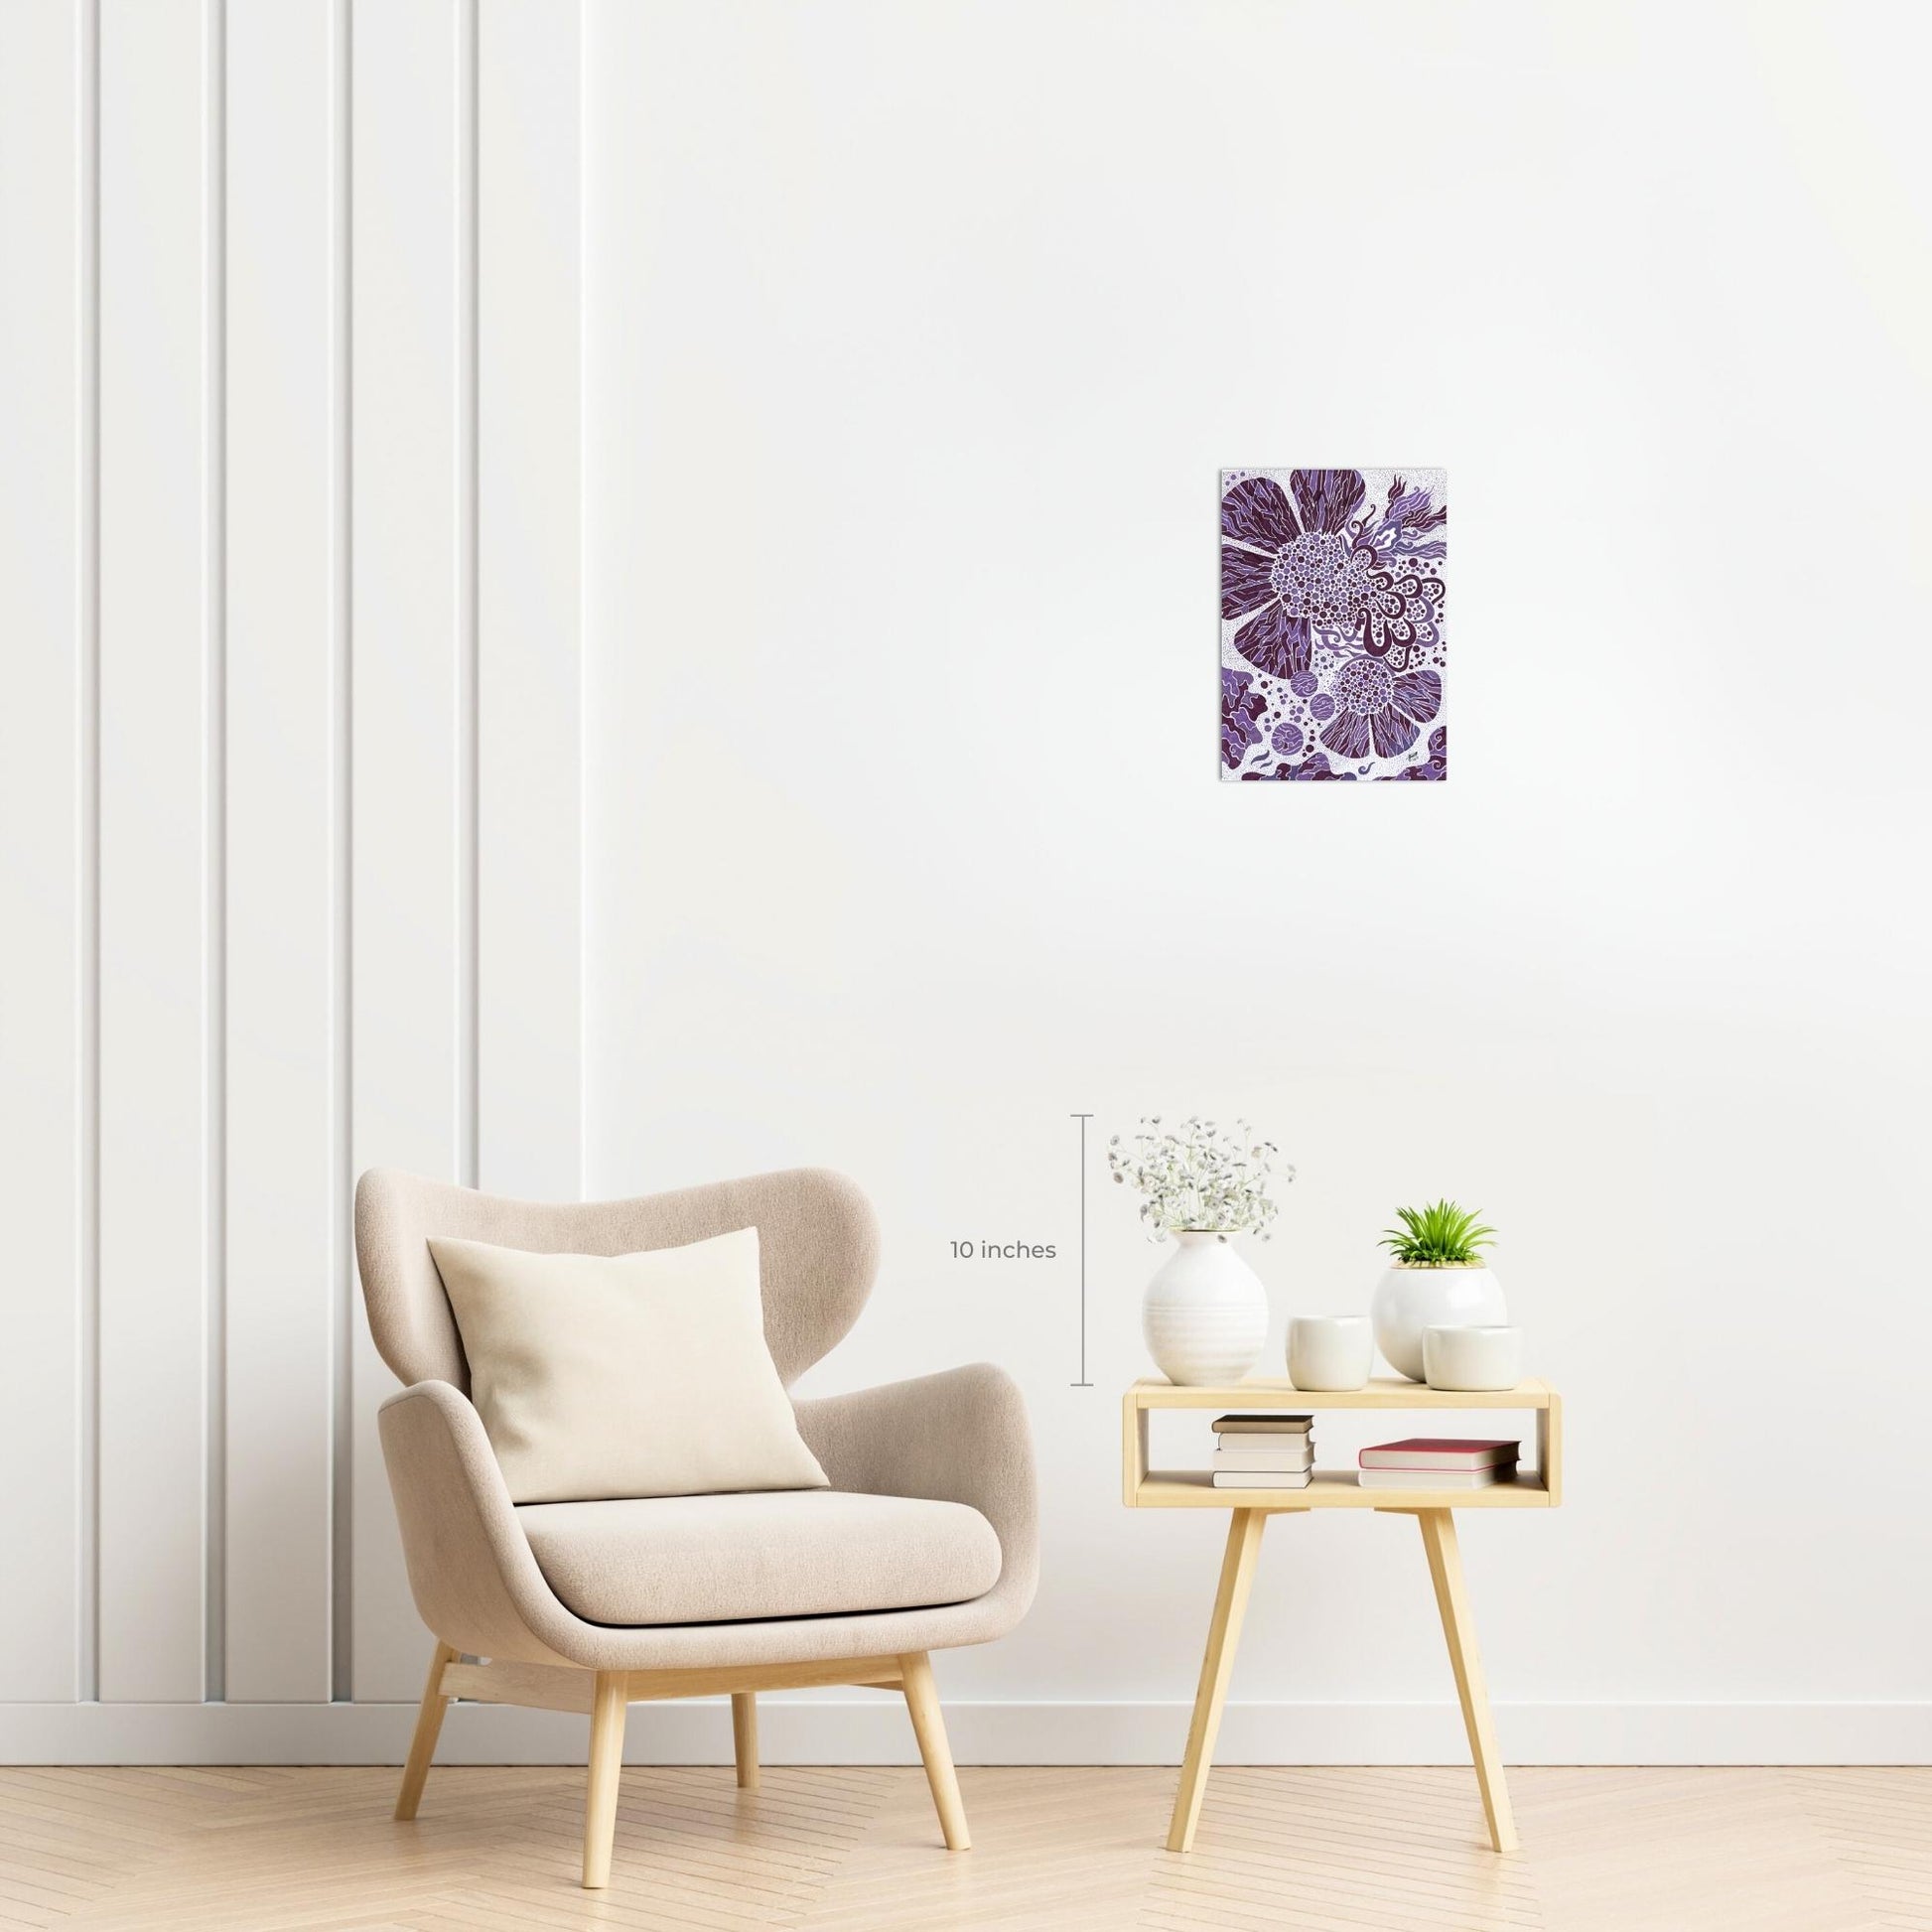 Dusty Lavender: Limited Edition Print